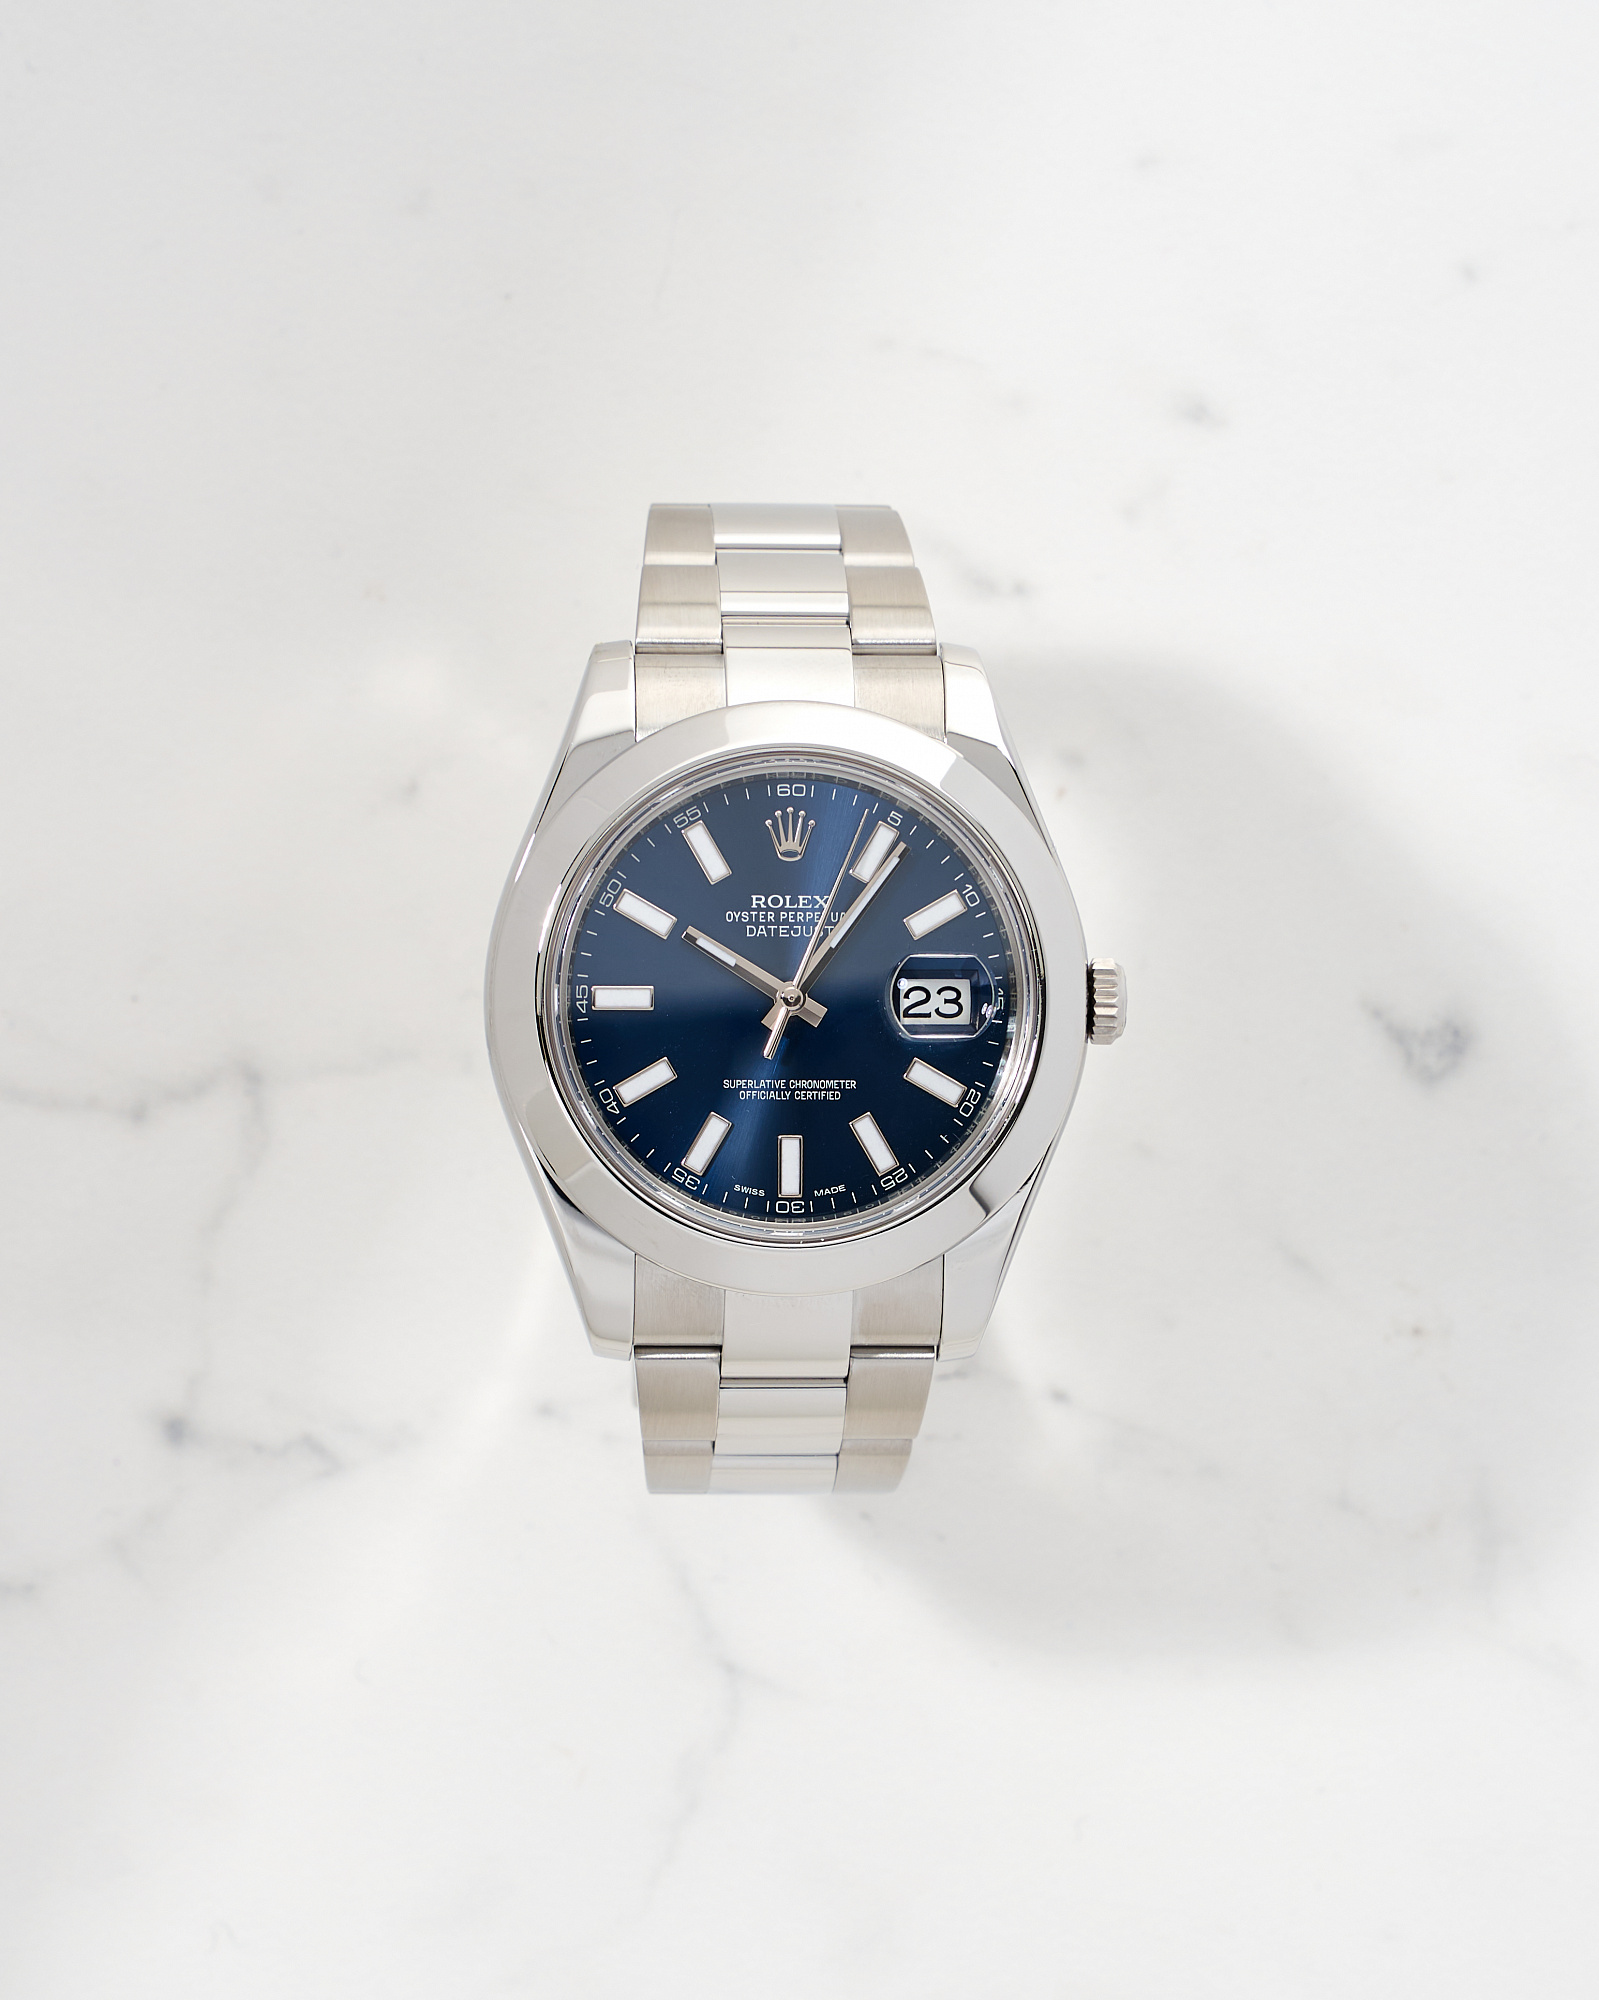 Rolex Oyster Perpetual Datejust II 41mm Blue Dial B&P 2015 year